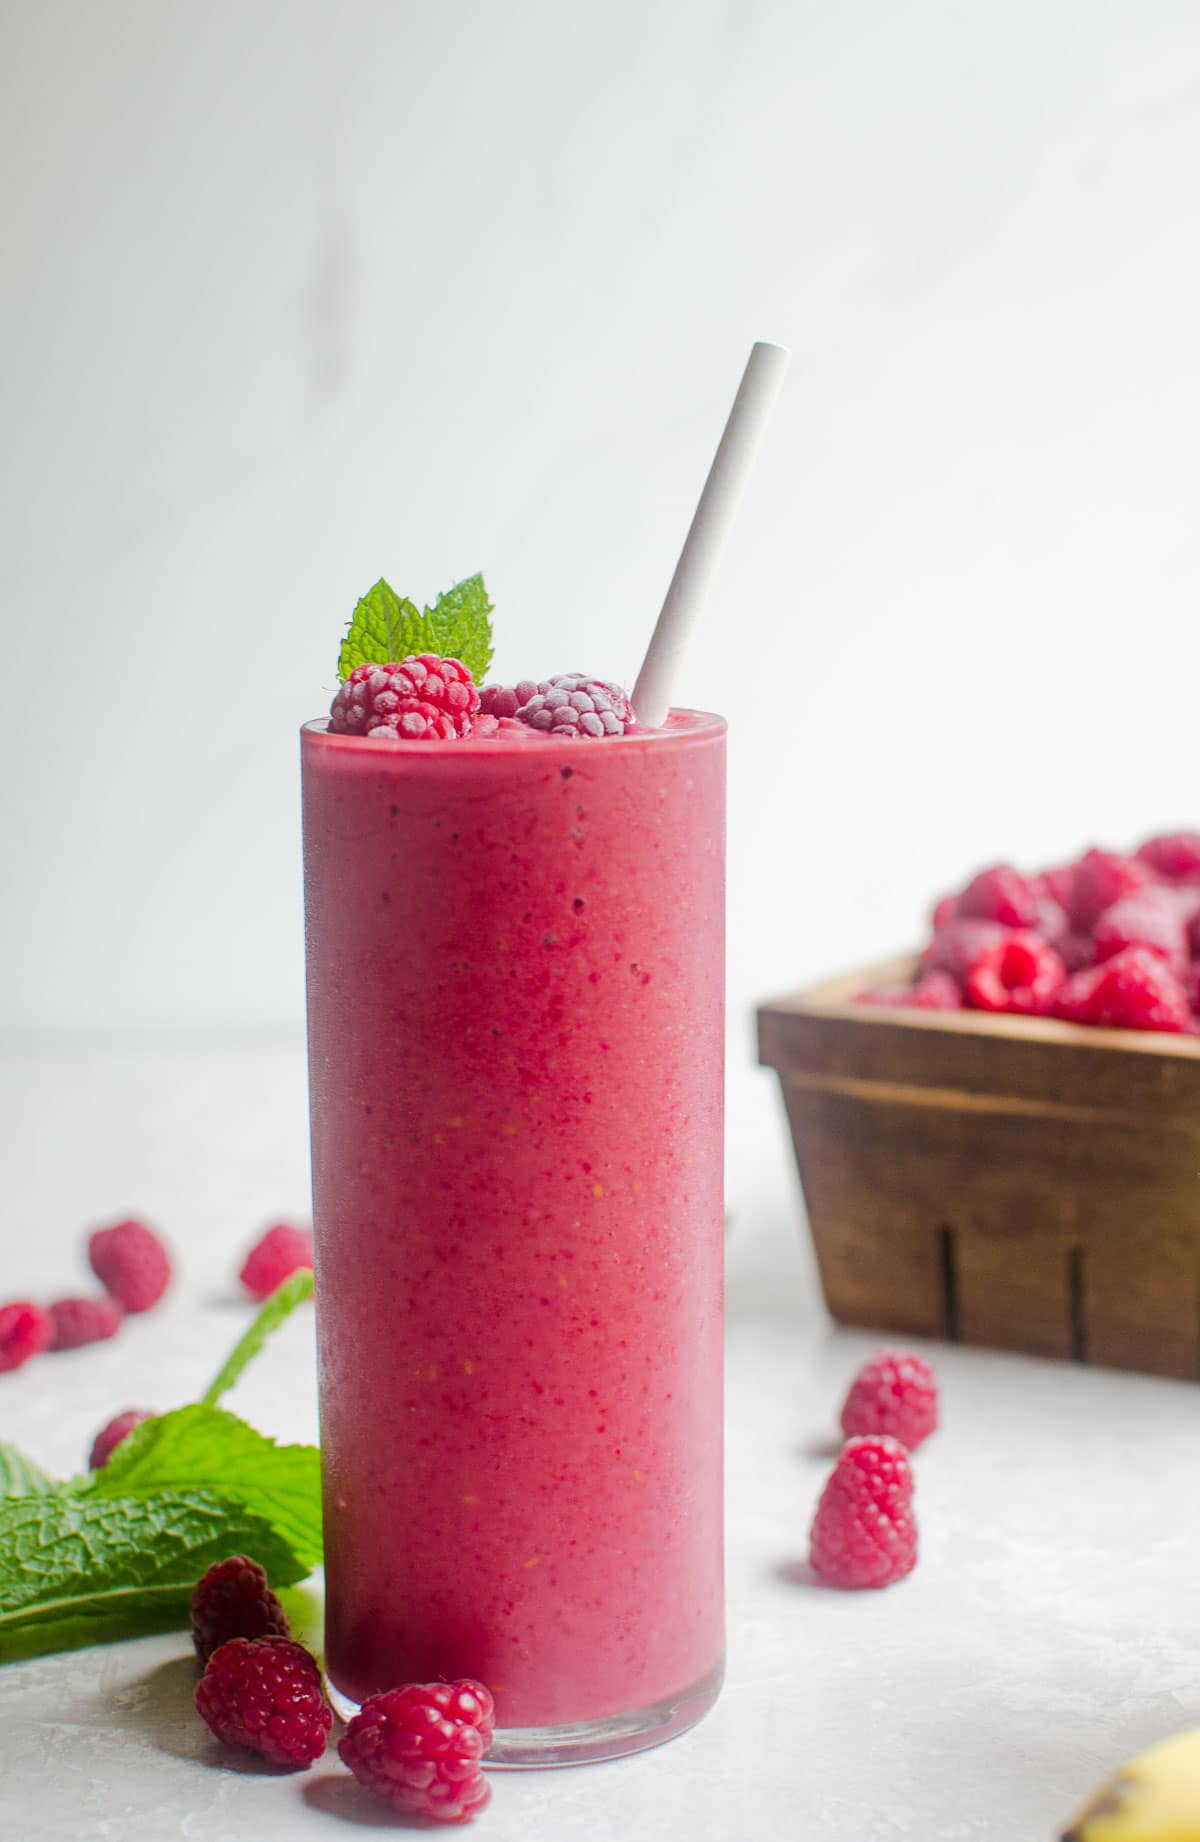 A smoothie on a table surrounded by fresh raspberries and mint.